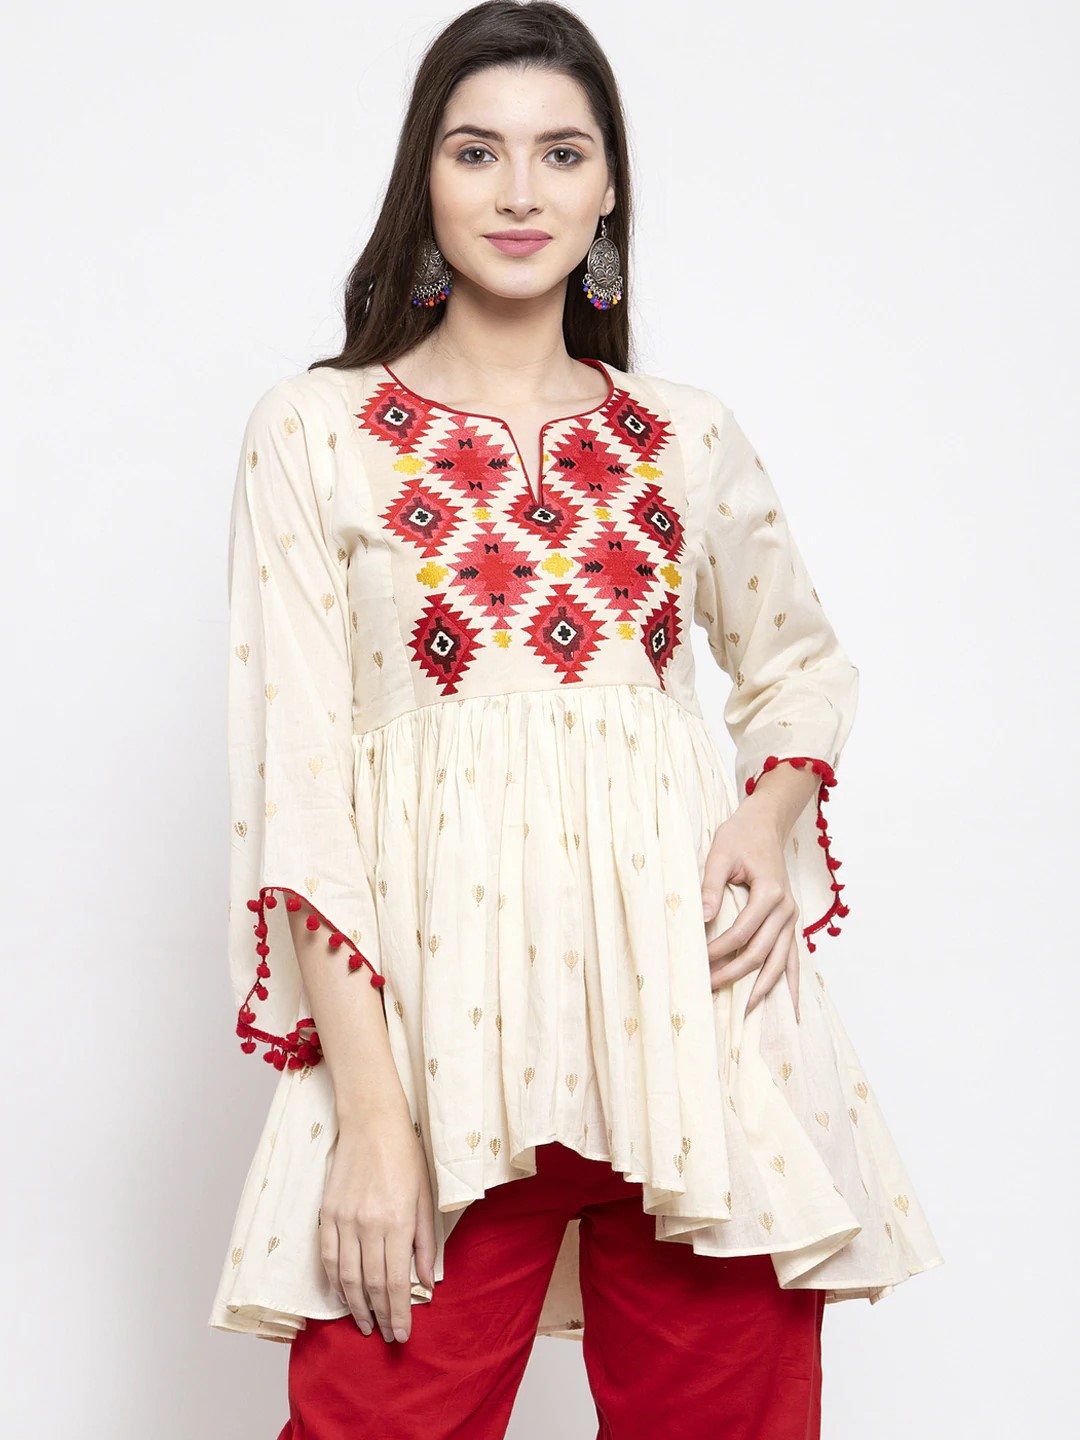 Women's  Off-White & Red Printed Tunic - Wahe-NOOR